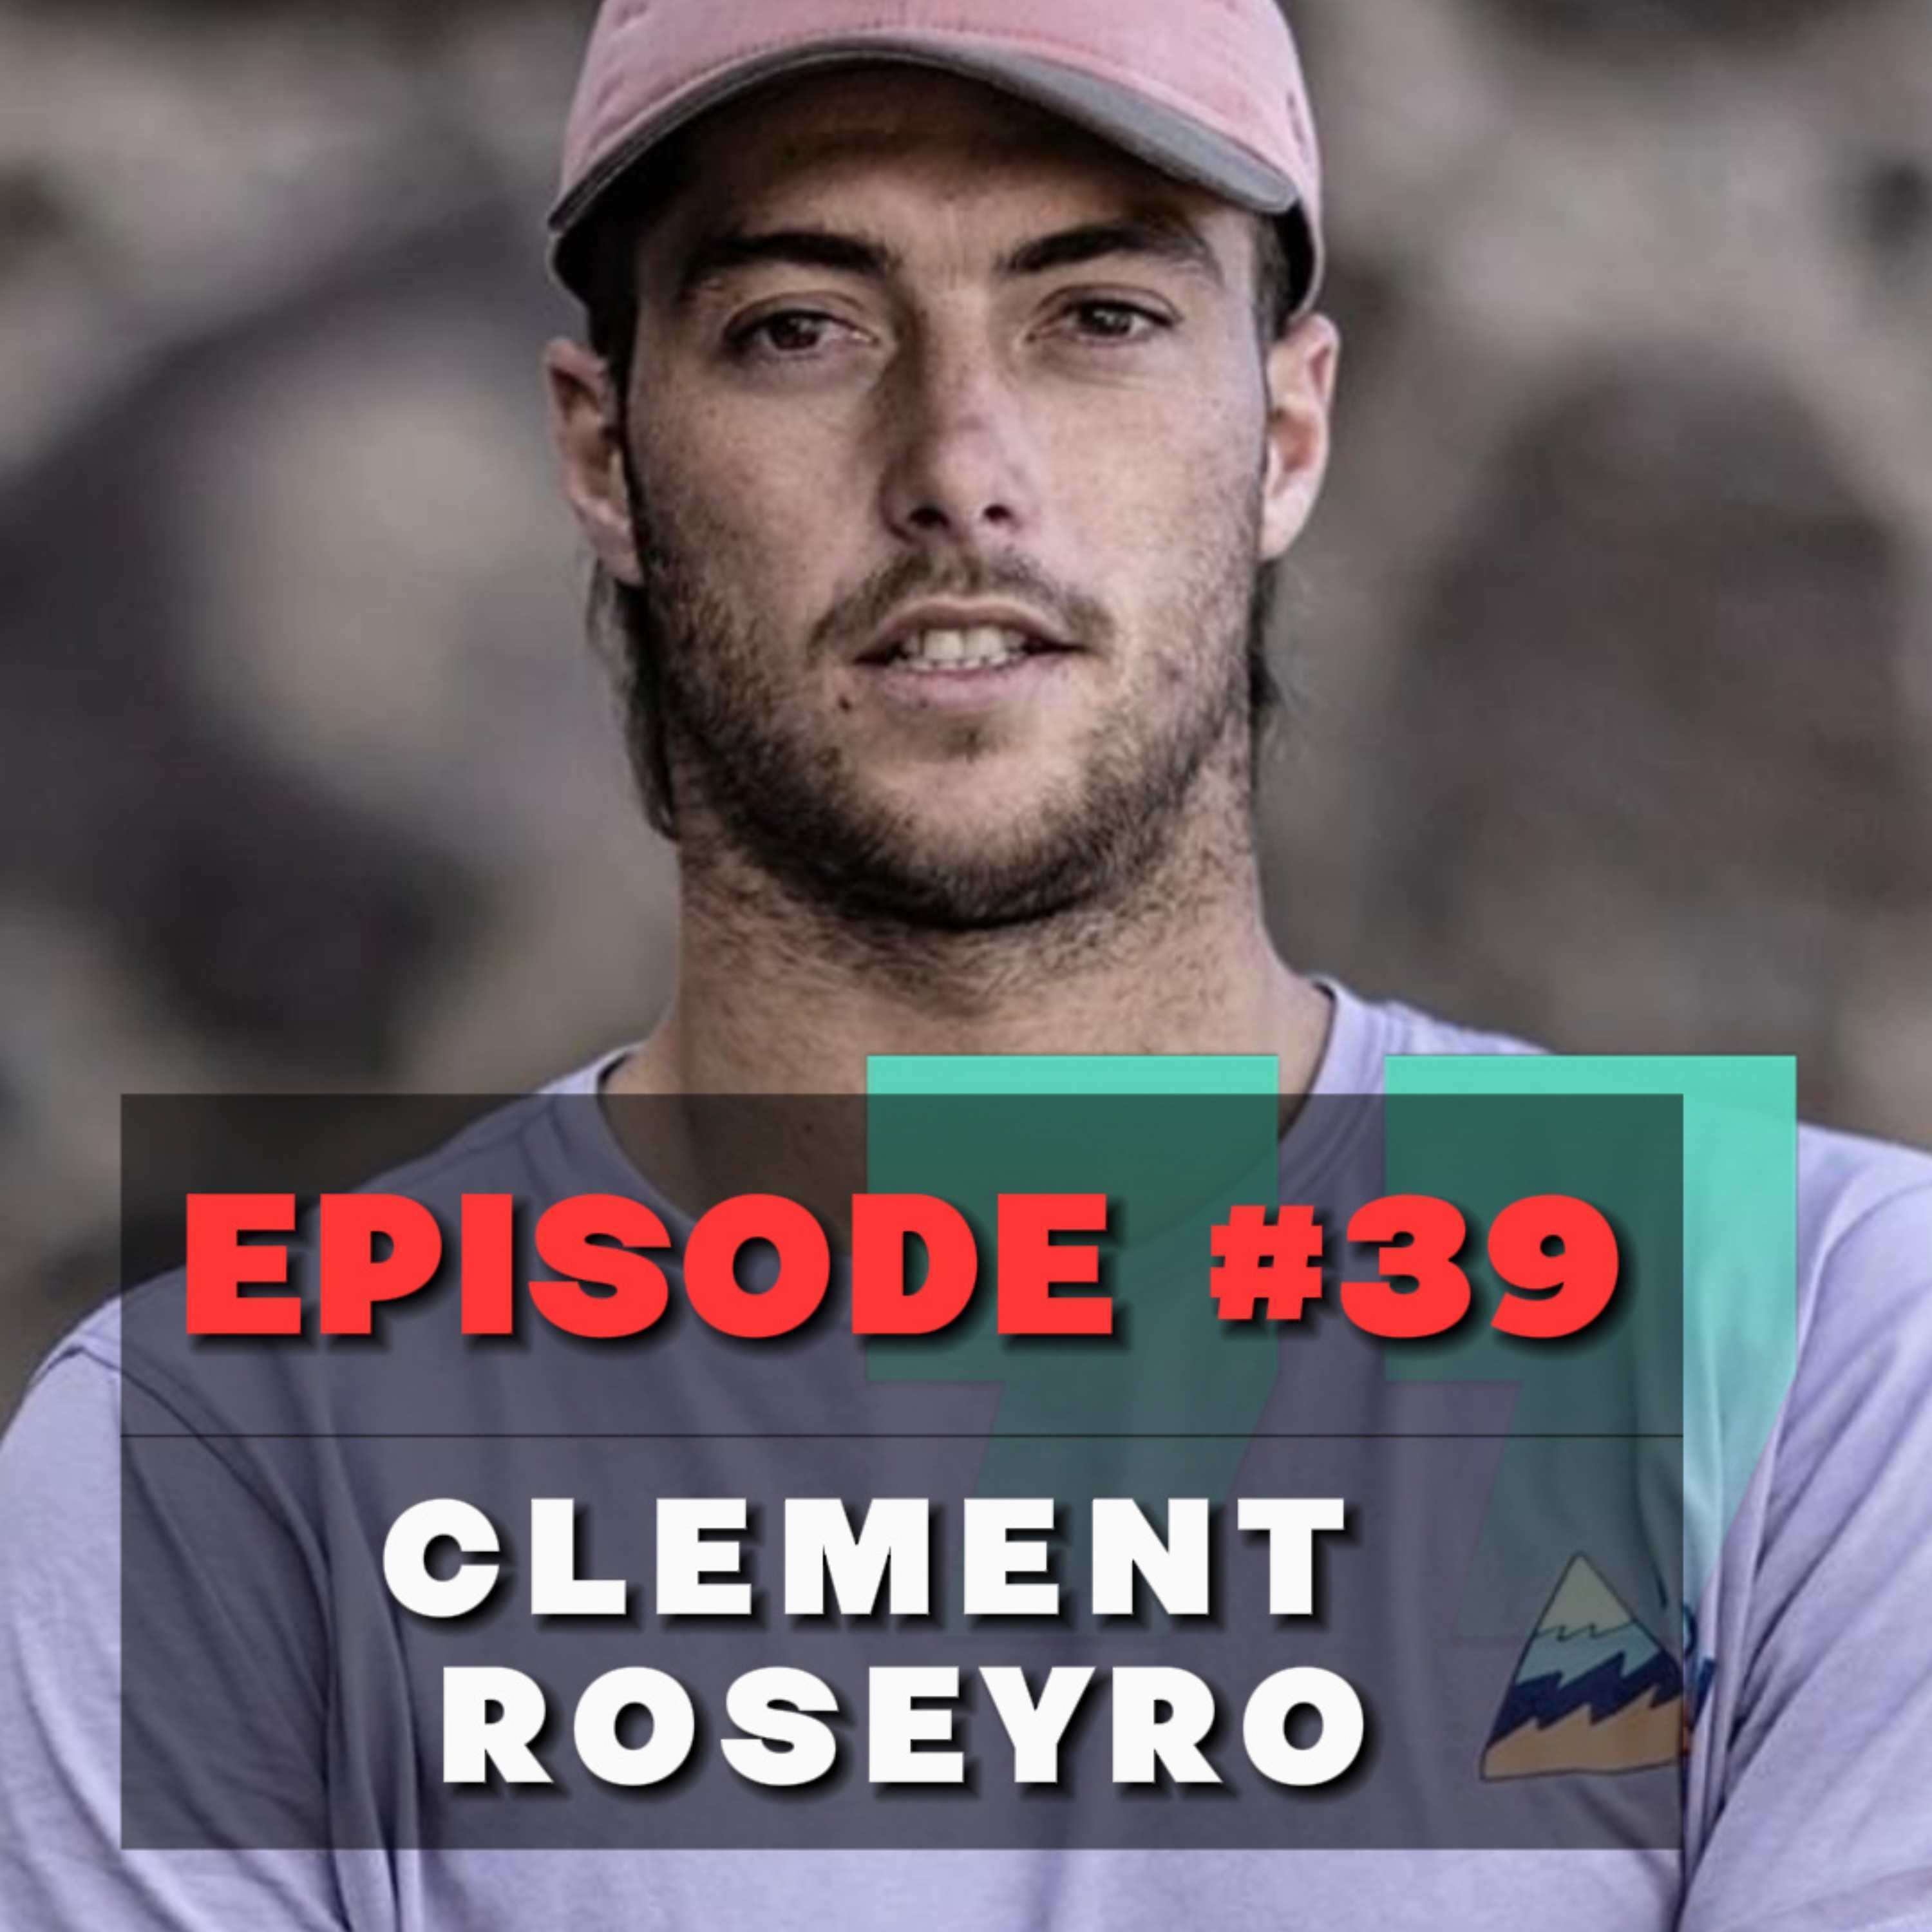 Episode #39 - Clement Roseyro